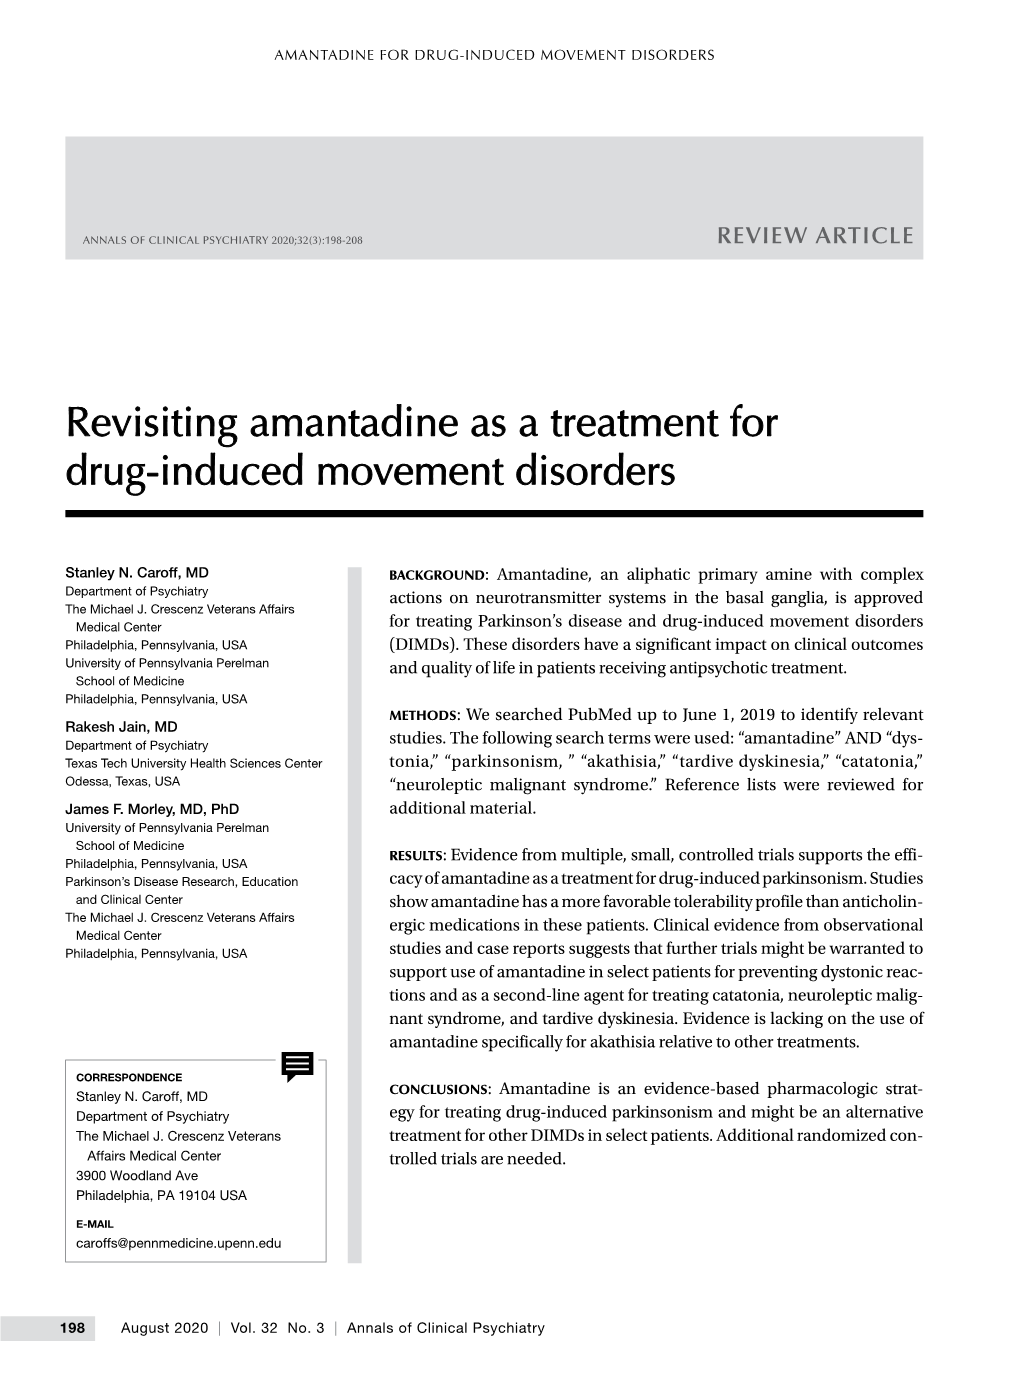 Revisiting Amantadine As a Treatment for Drug-Induced Movement Disorders